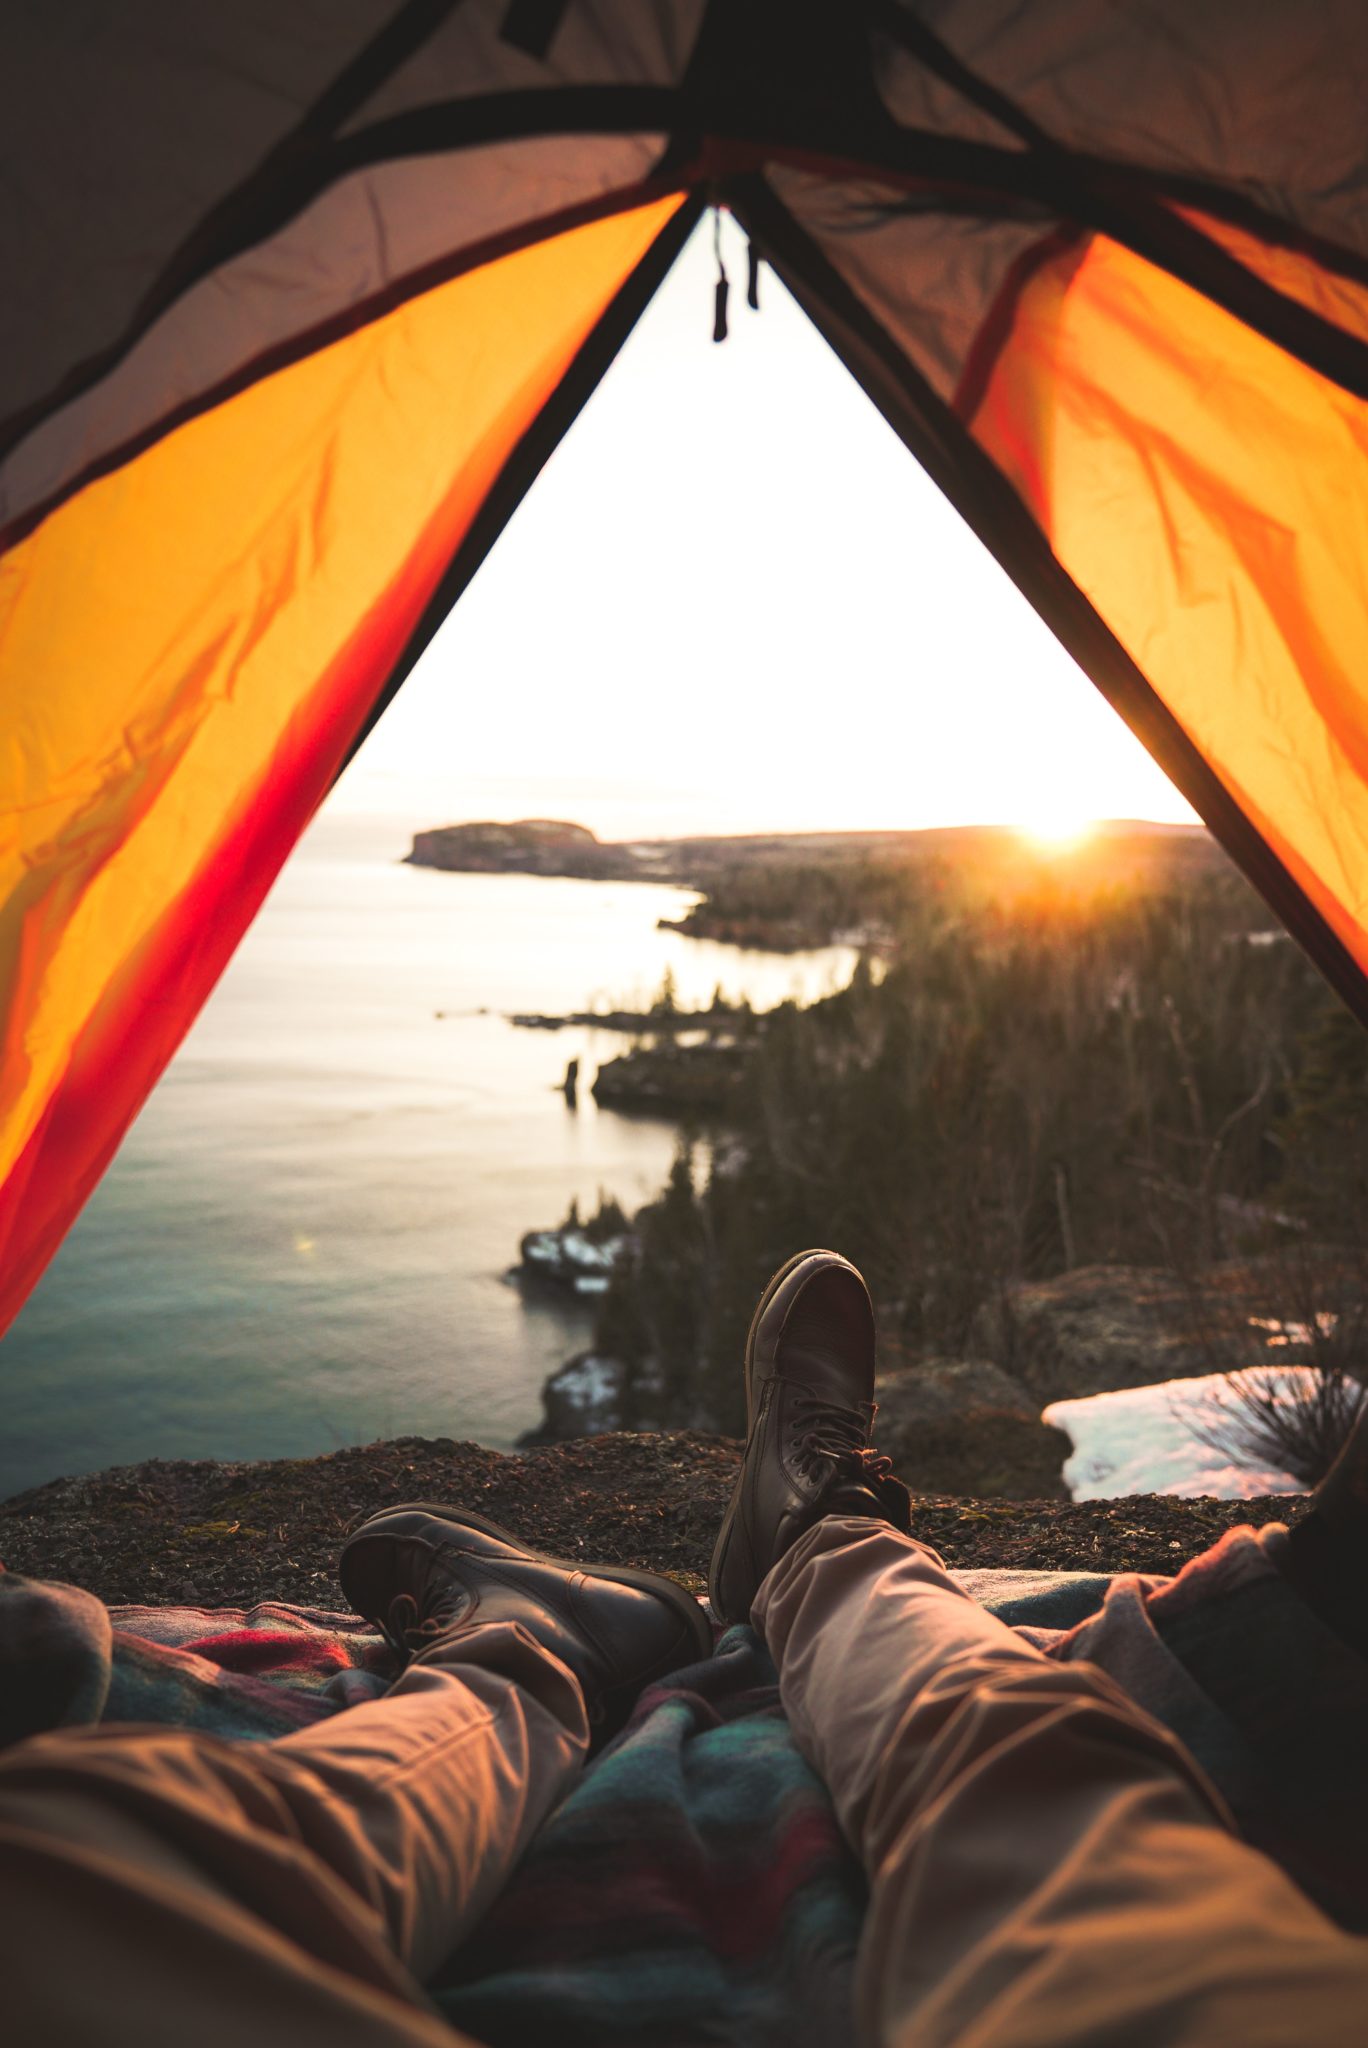 How to Stay Safe While Camping Alone